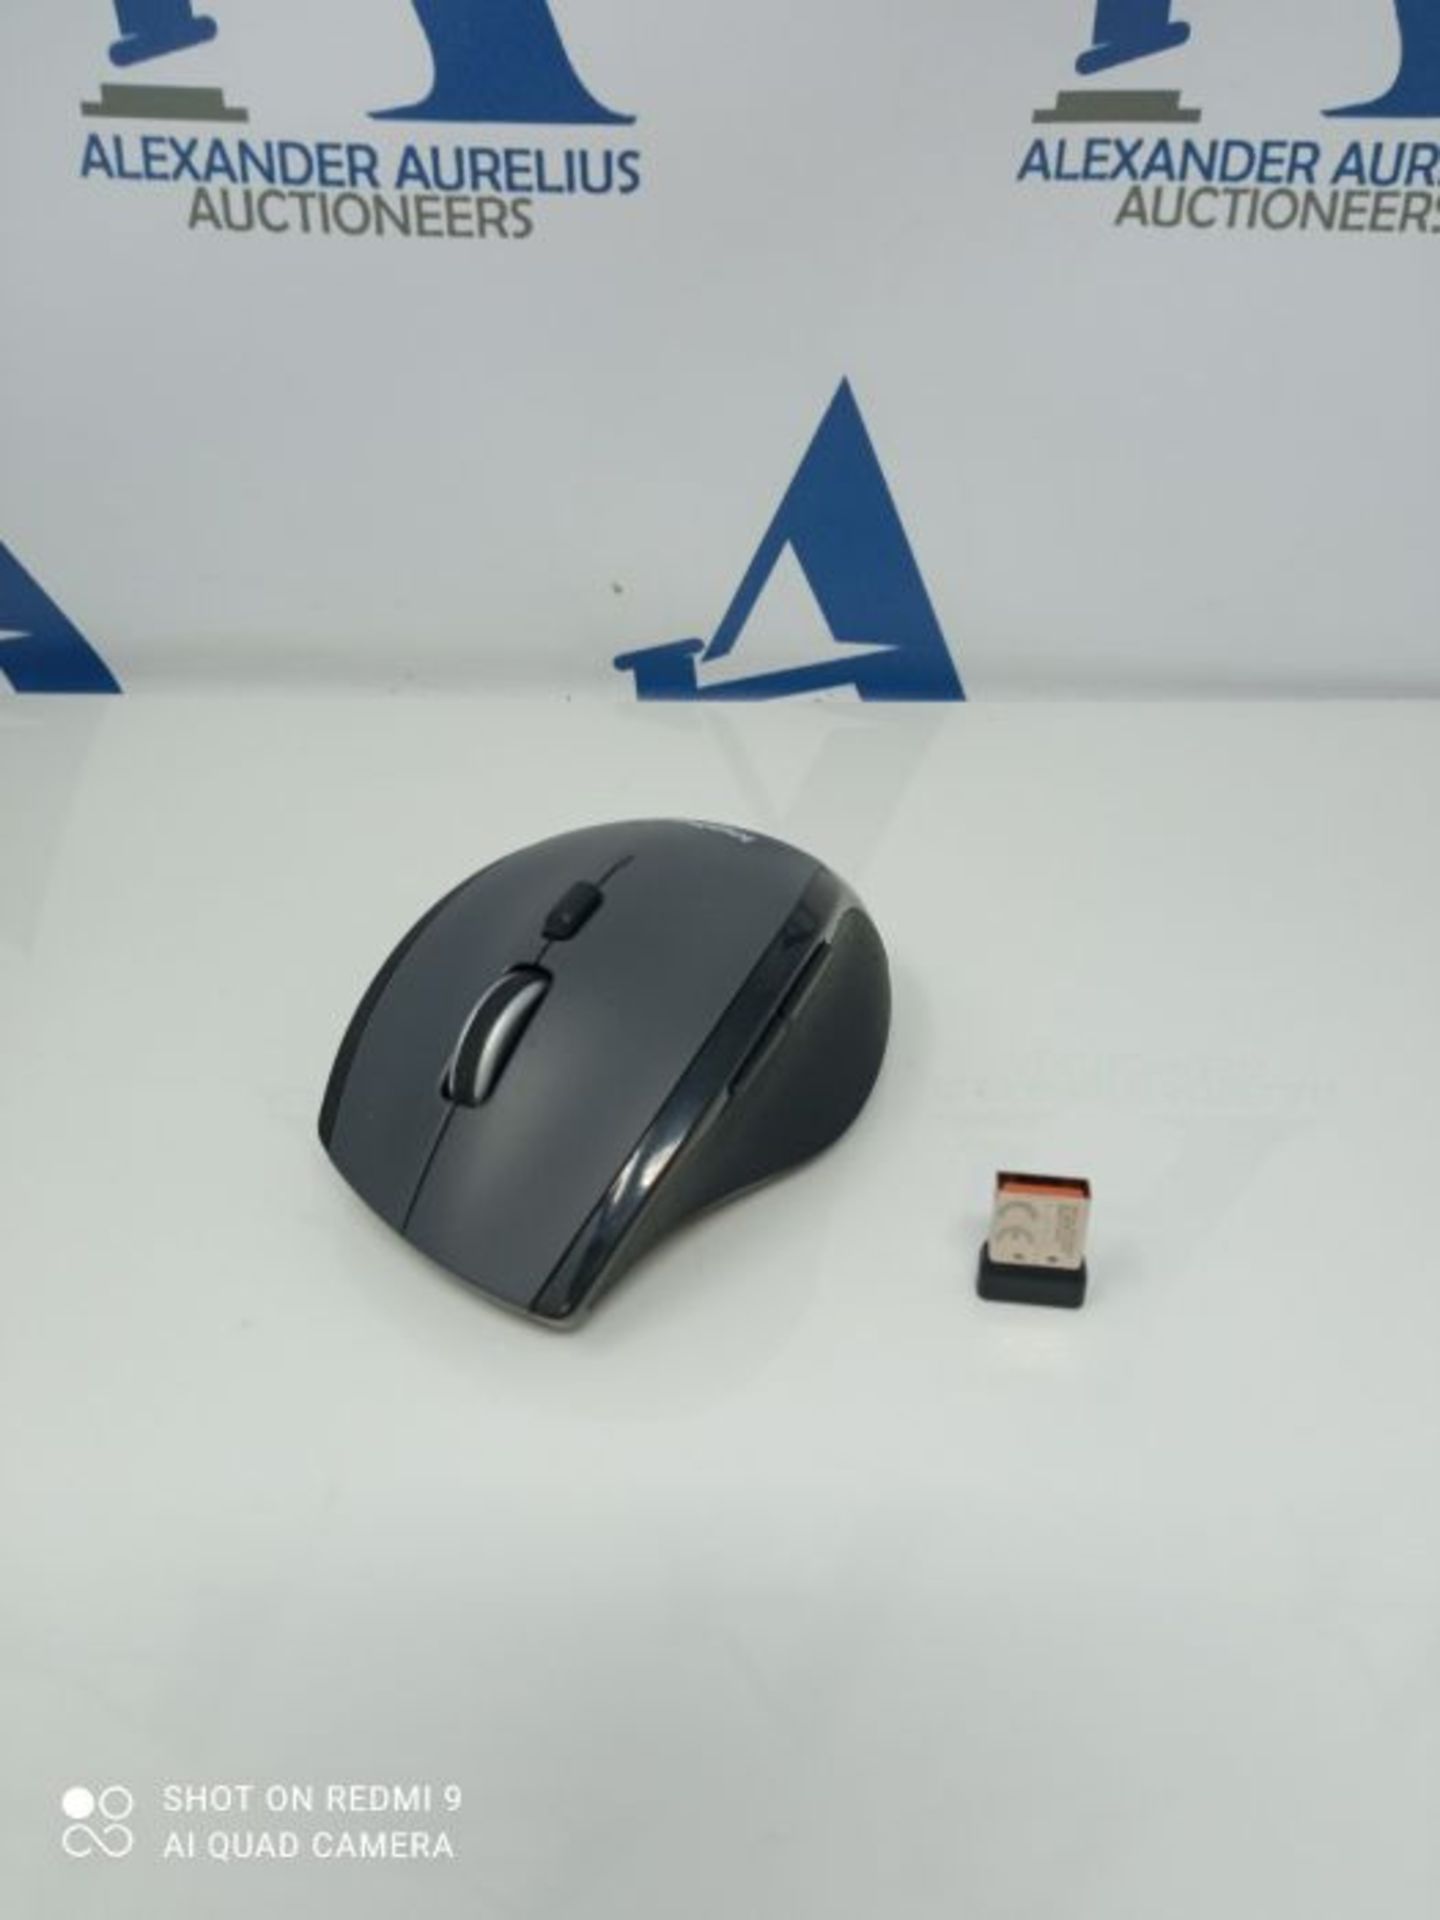 Logitech M705 Marathon Wireless Mouse, 2.4 GHz with USB Unifying Mini-Receiver, 1000 D - Image 2 of 2